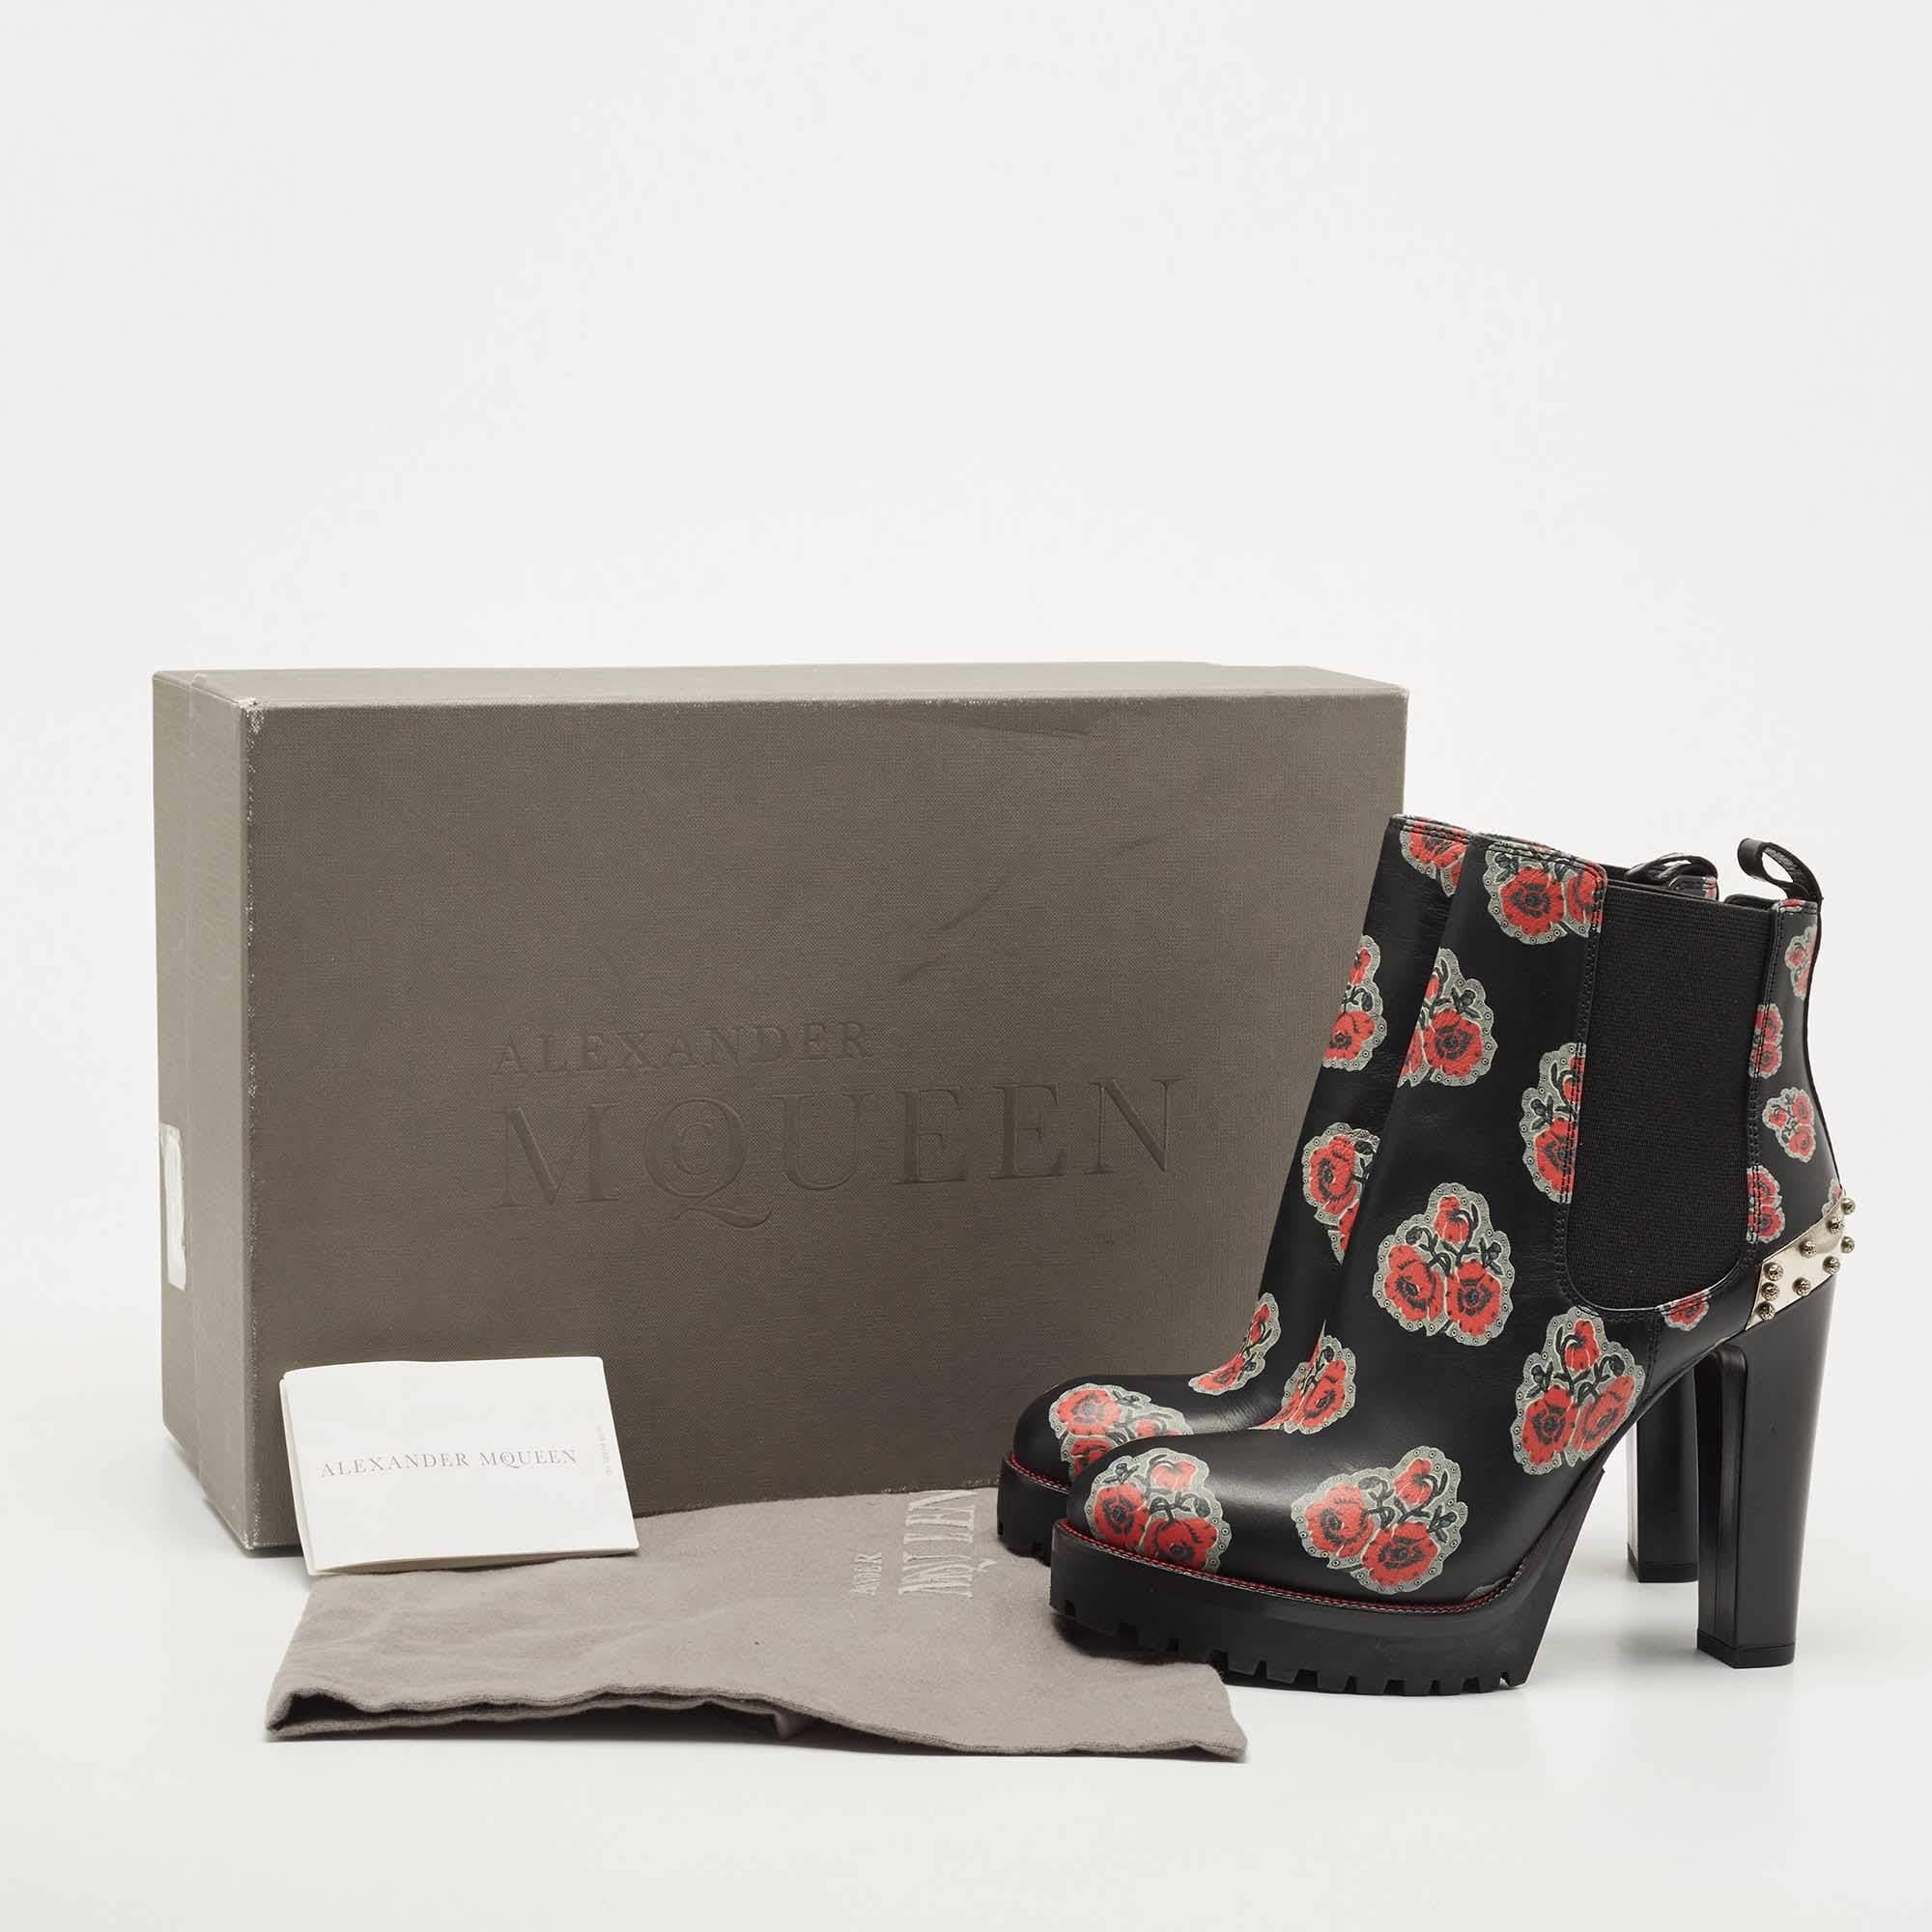 Alexander McQueen Black Floral Print Leather Chelsea Studded Heels Ankle Boots S 4